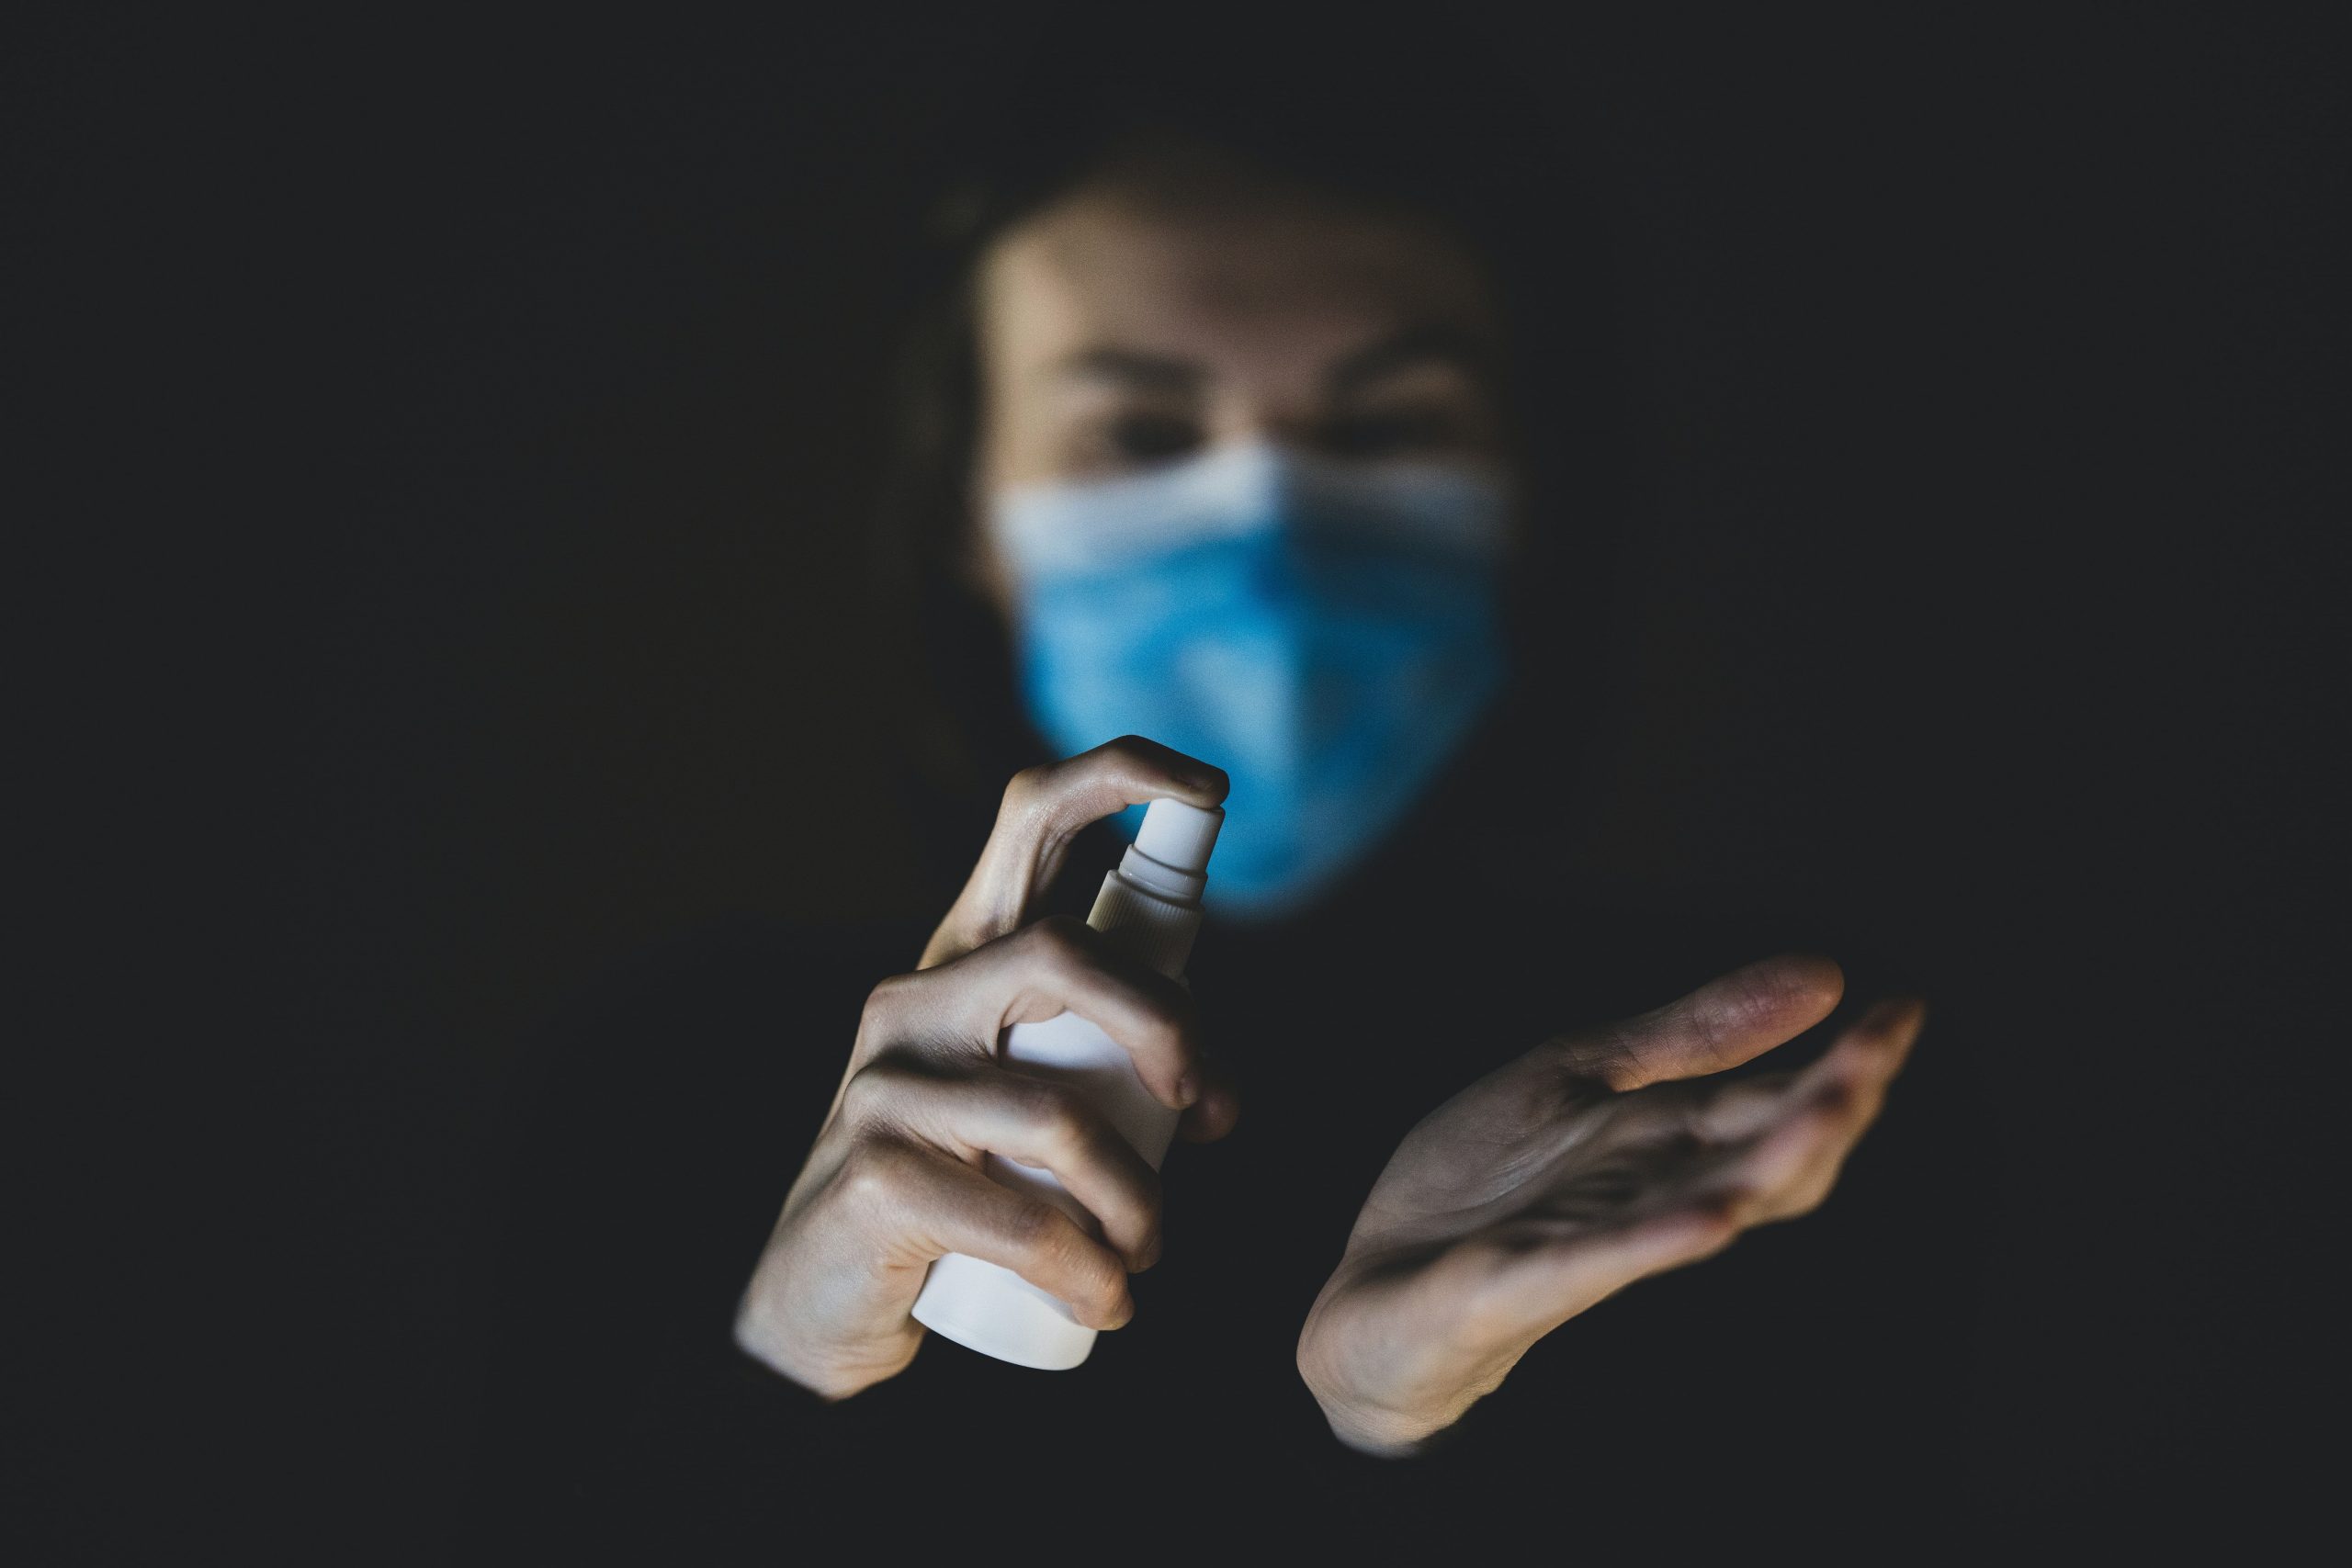 World Asthma Day 2021: How an asthmatic patient can stay safe in COVID-19 times